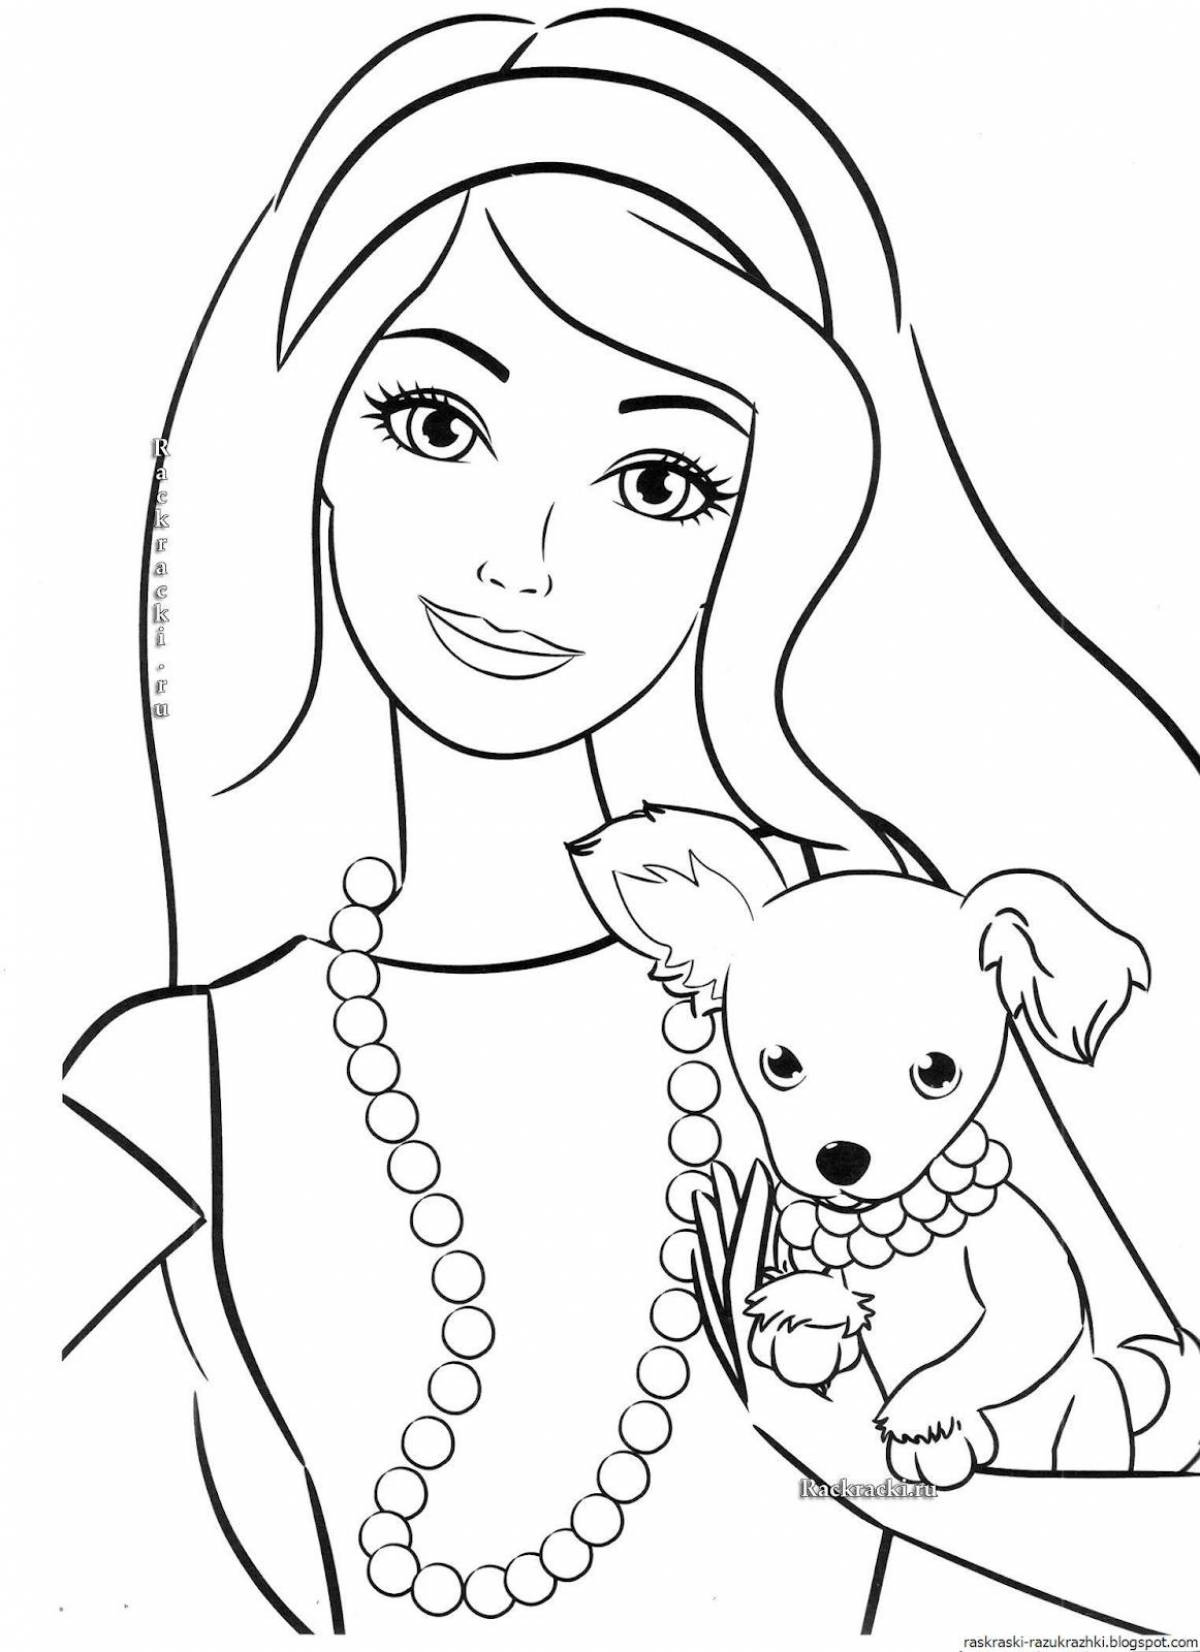 Magic coloring book for girls 7-8 years old